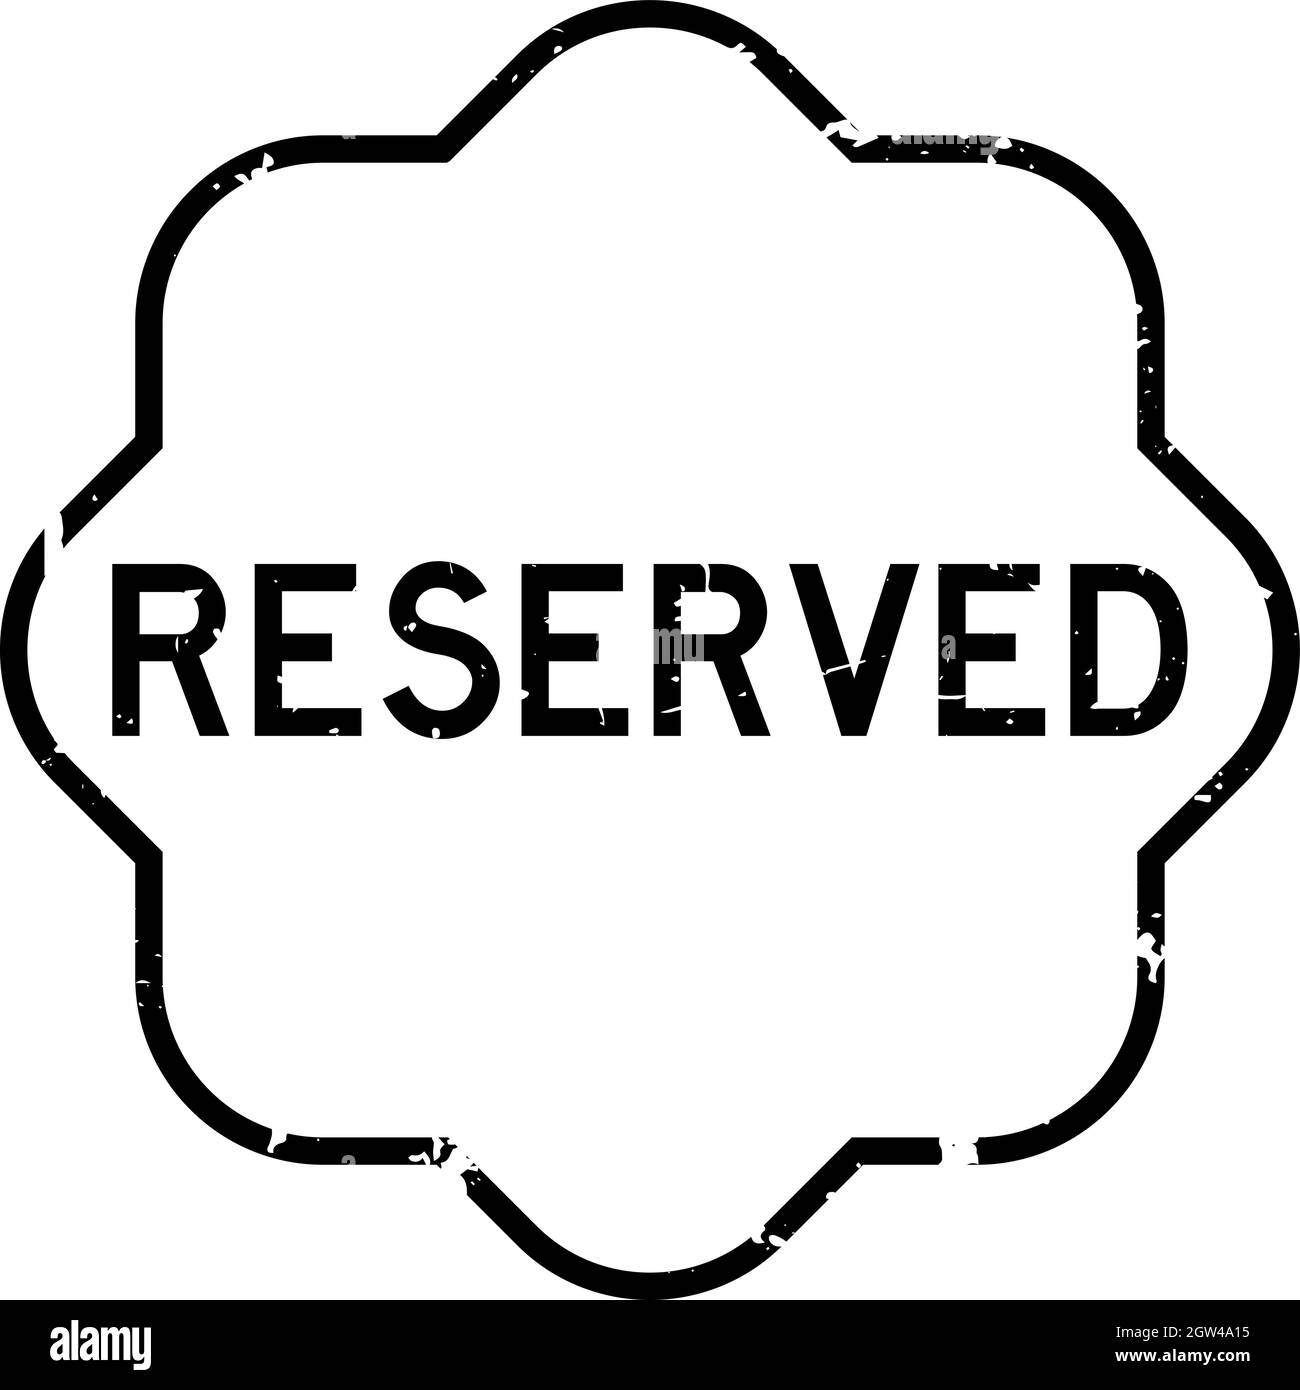 Grunge black reserved word rubber seal stamp on white background Stock Vector